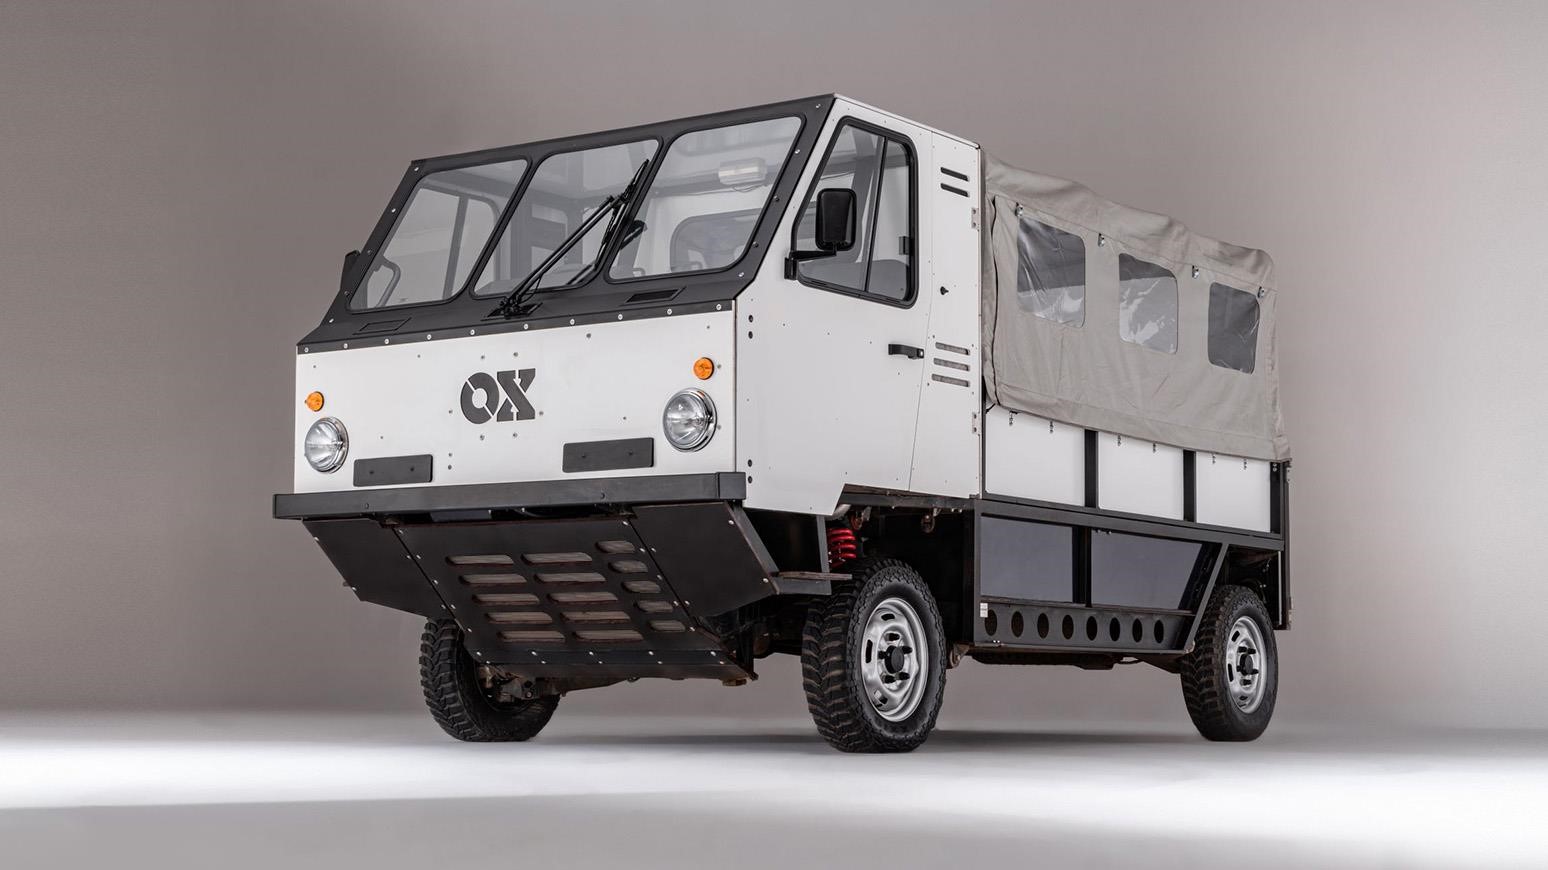 Potenza Technology & FPT Industrial Develop Electric Battery Pack For OX EV Truck For Emerging Markets